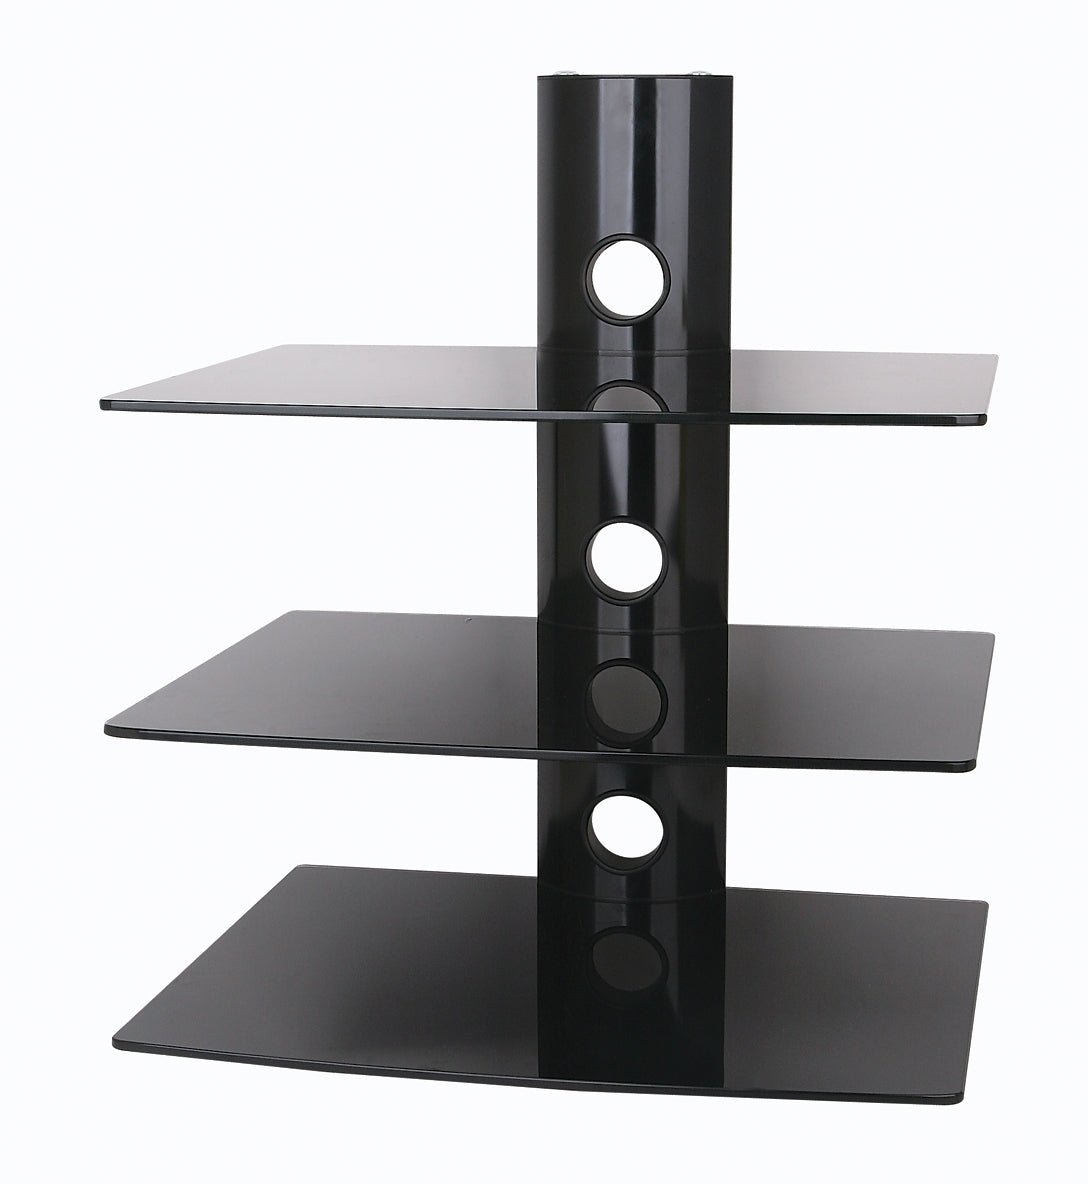 64-4053 Triple Glass Shelf Unit for Wall Mounting DVD / Receiver